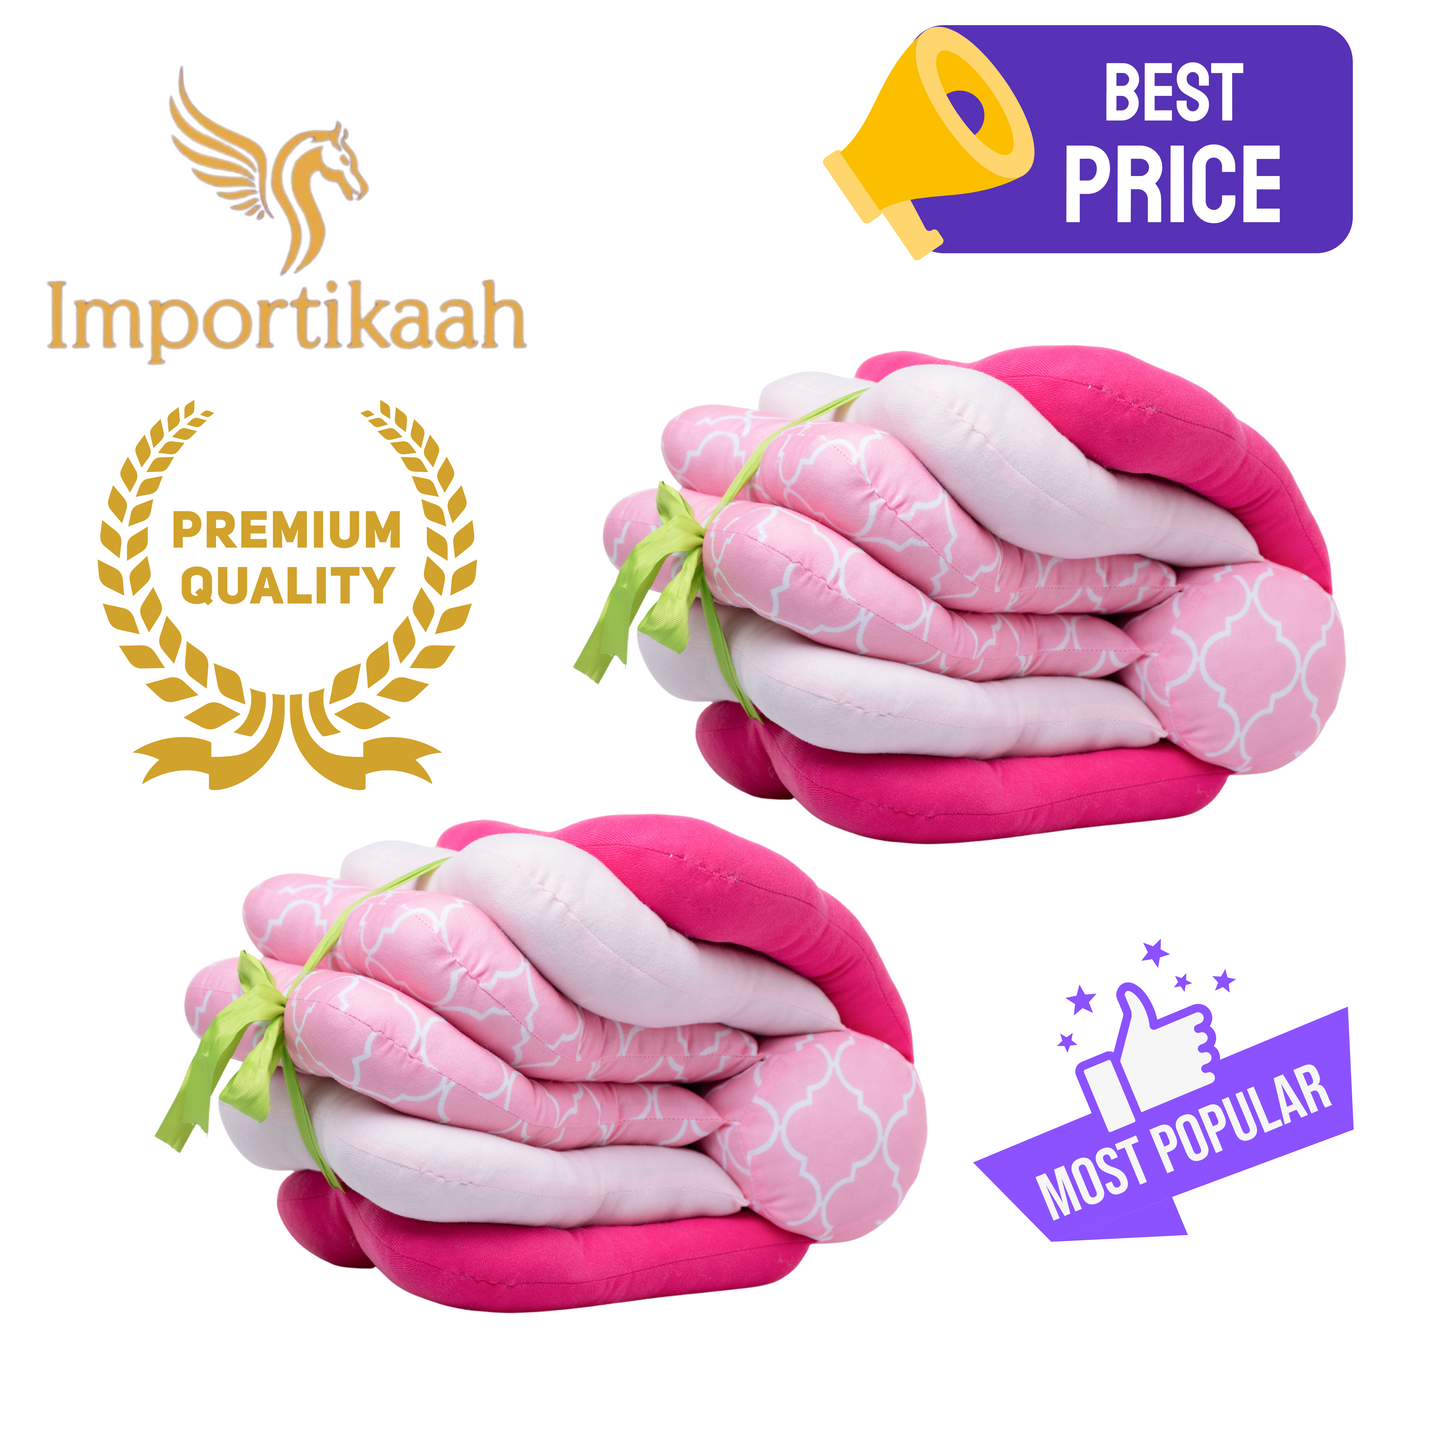 Two-pack-of-Importikaah-Baby-Breastfeeding-Adjustable-Pillows